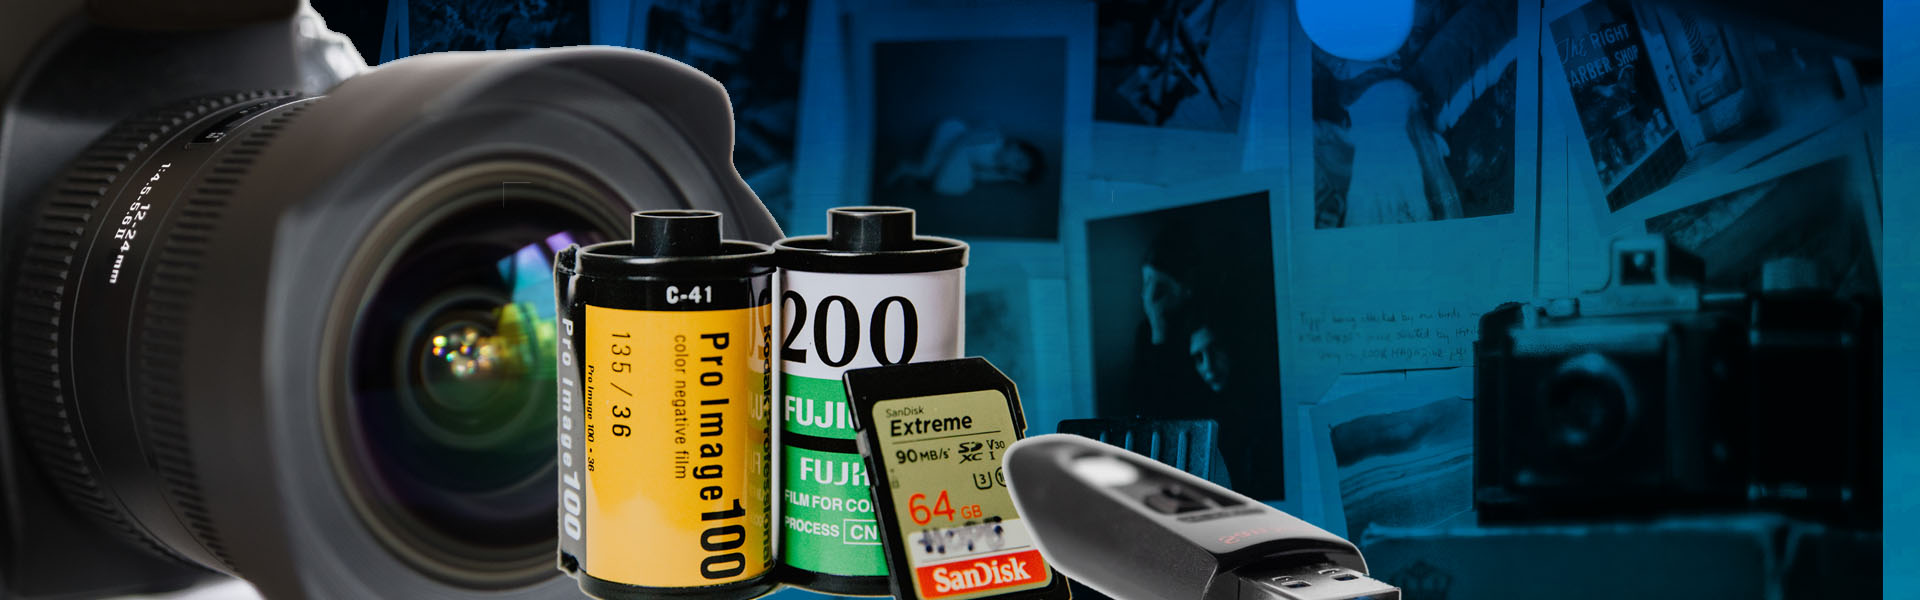 Ferndown Photographics can help recover lost or deleted files and transfer back to media cards or flash drives. We use image recovery software and techniques to help recovery of accidentally deleted files and photo recover